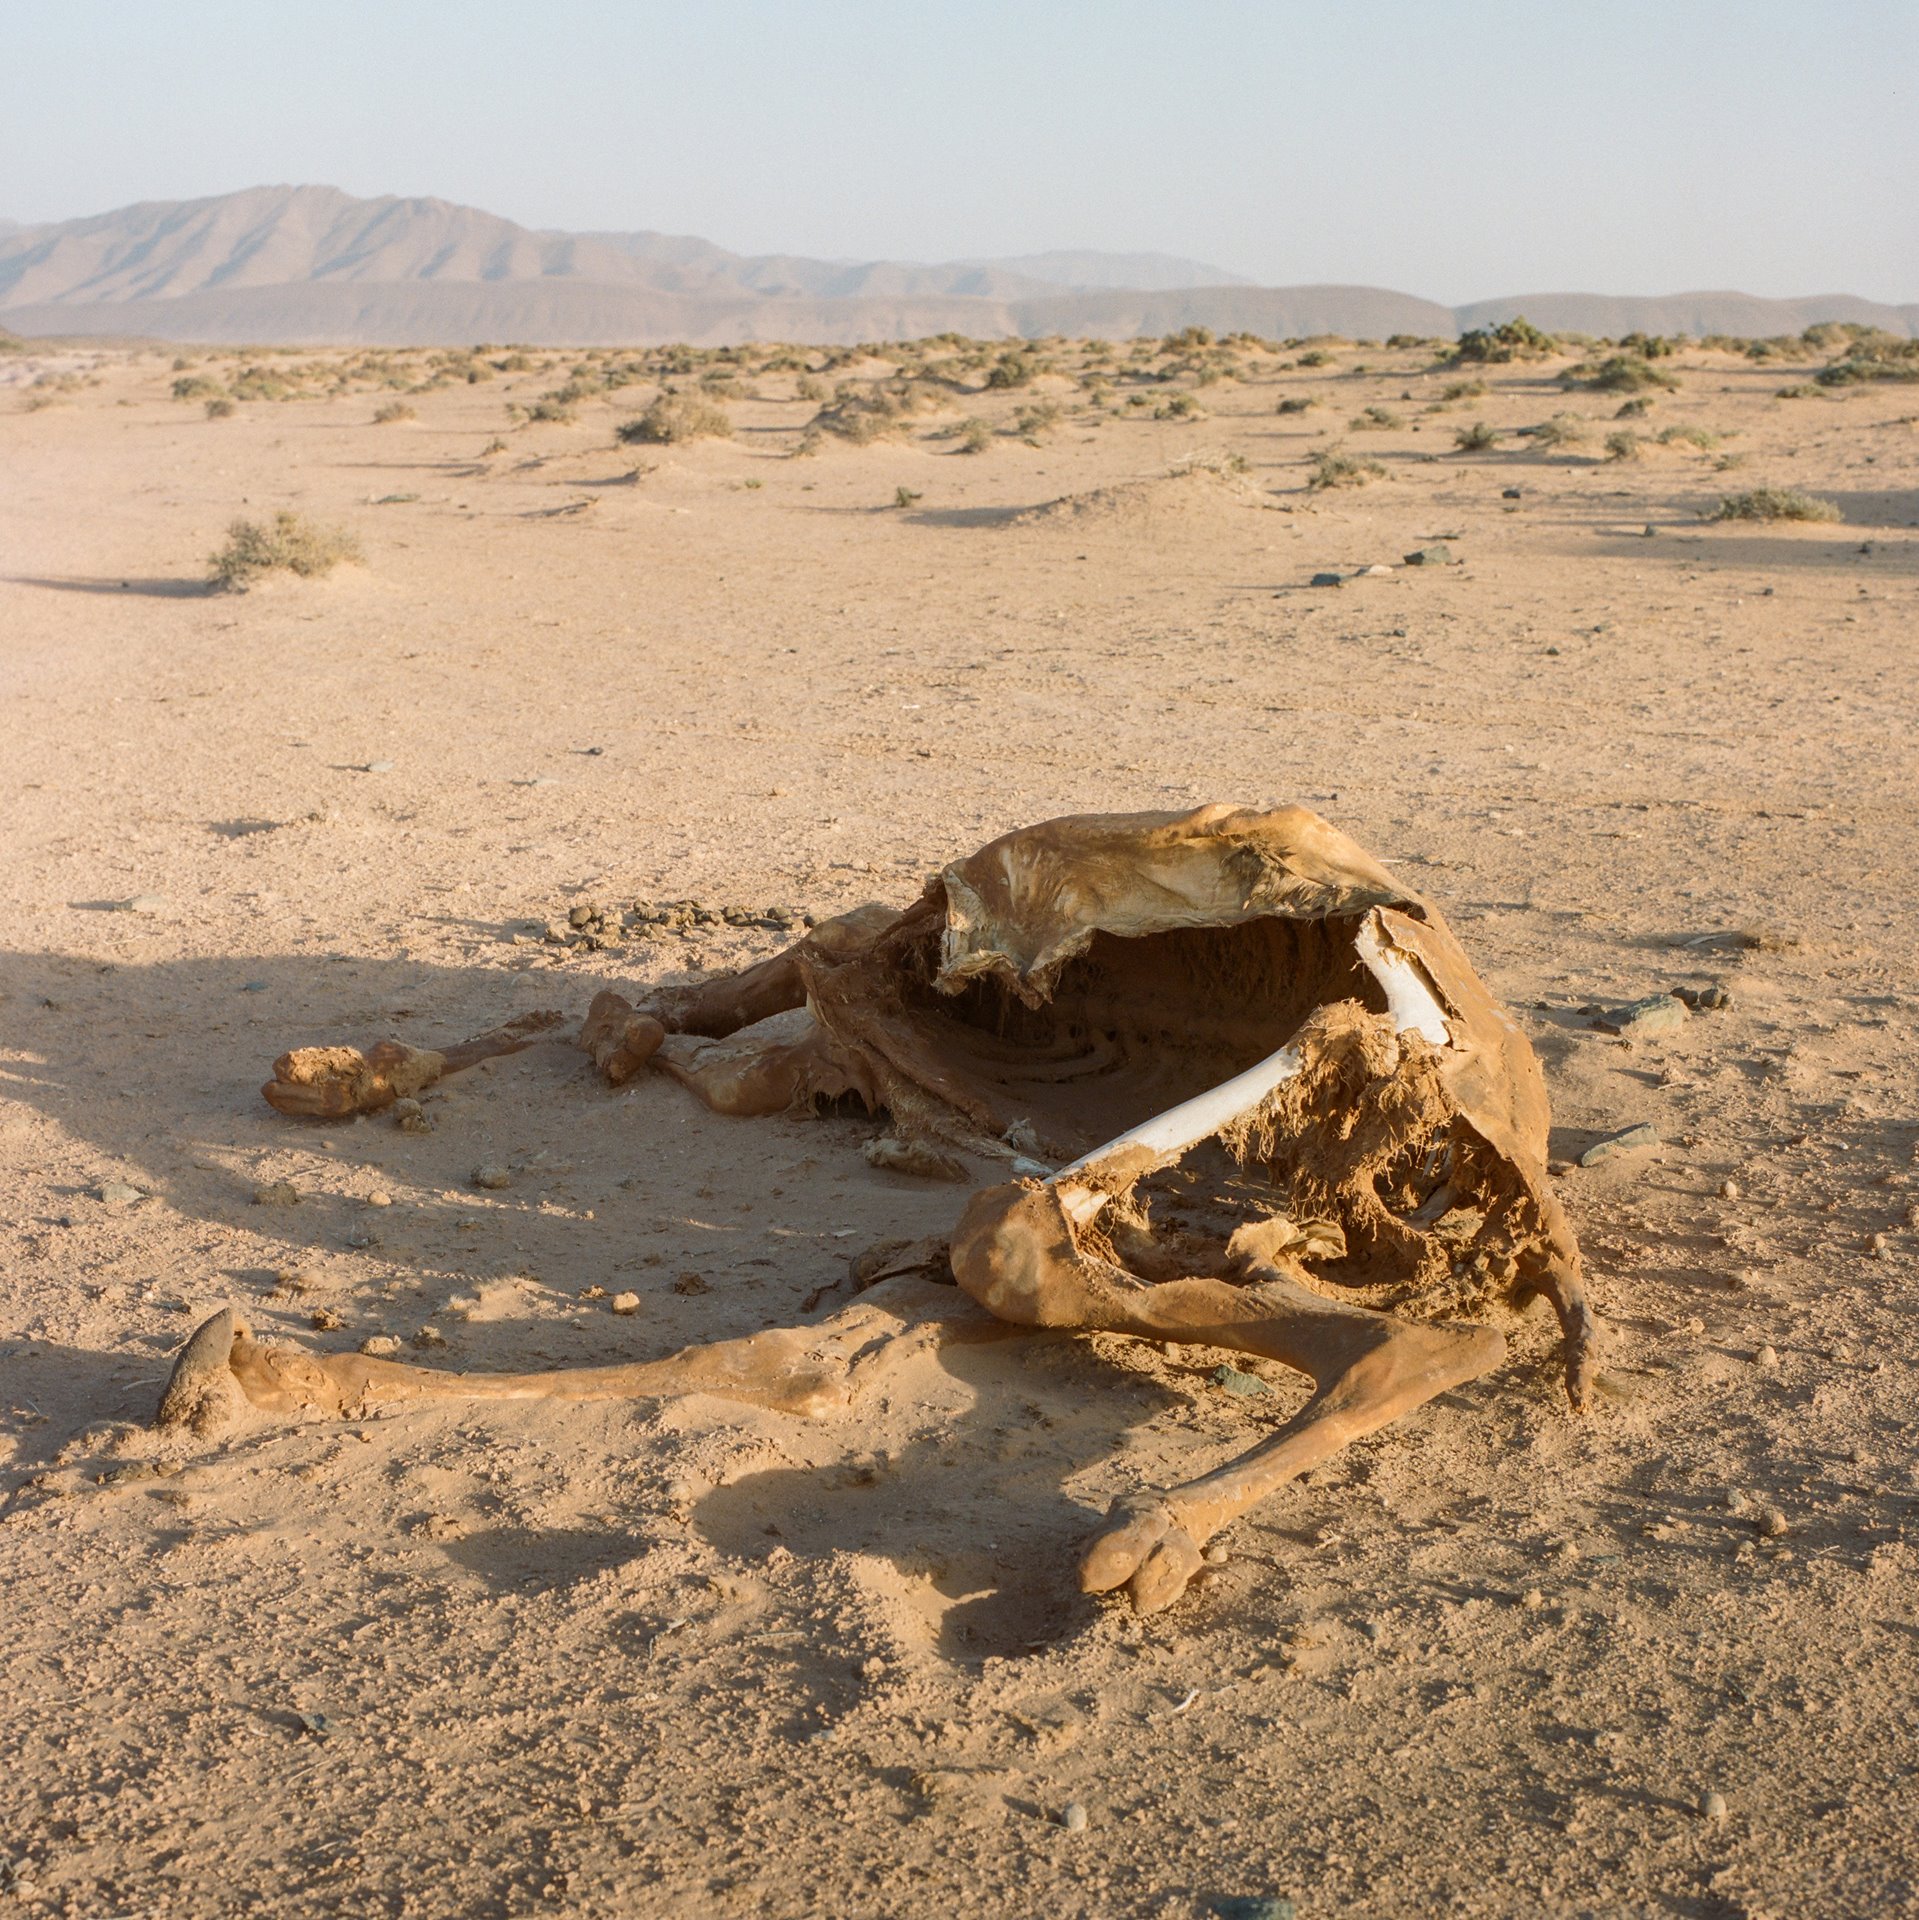 <p>The carcass of a dromedary that died of thirst after being lost in the desert lies near the Tighmert Oasis, in southern Morocco.</p>
